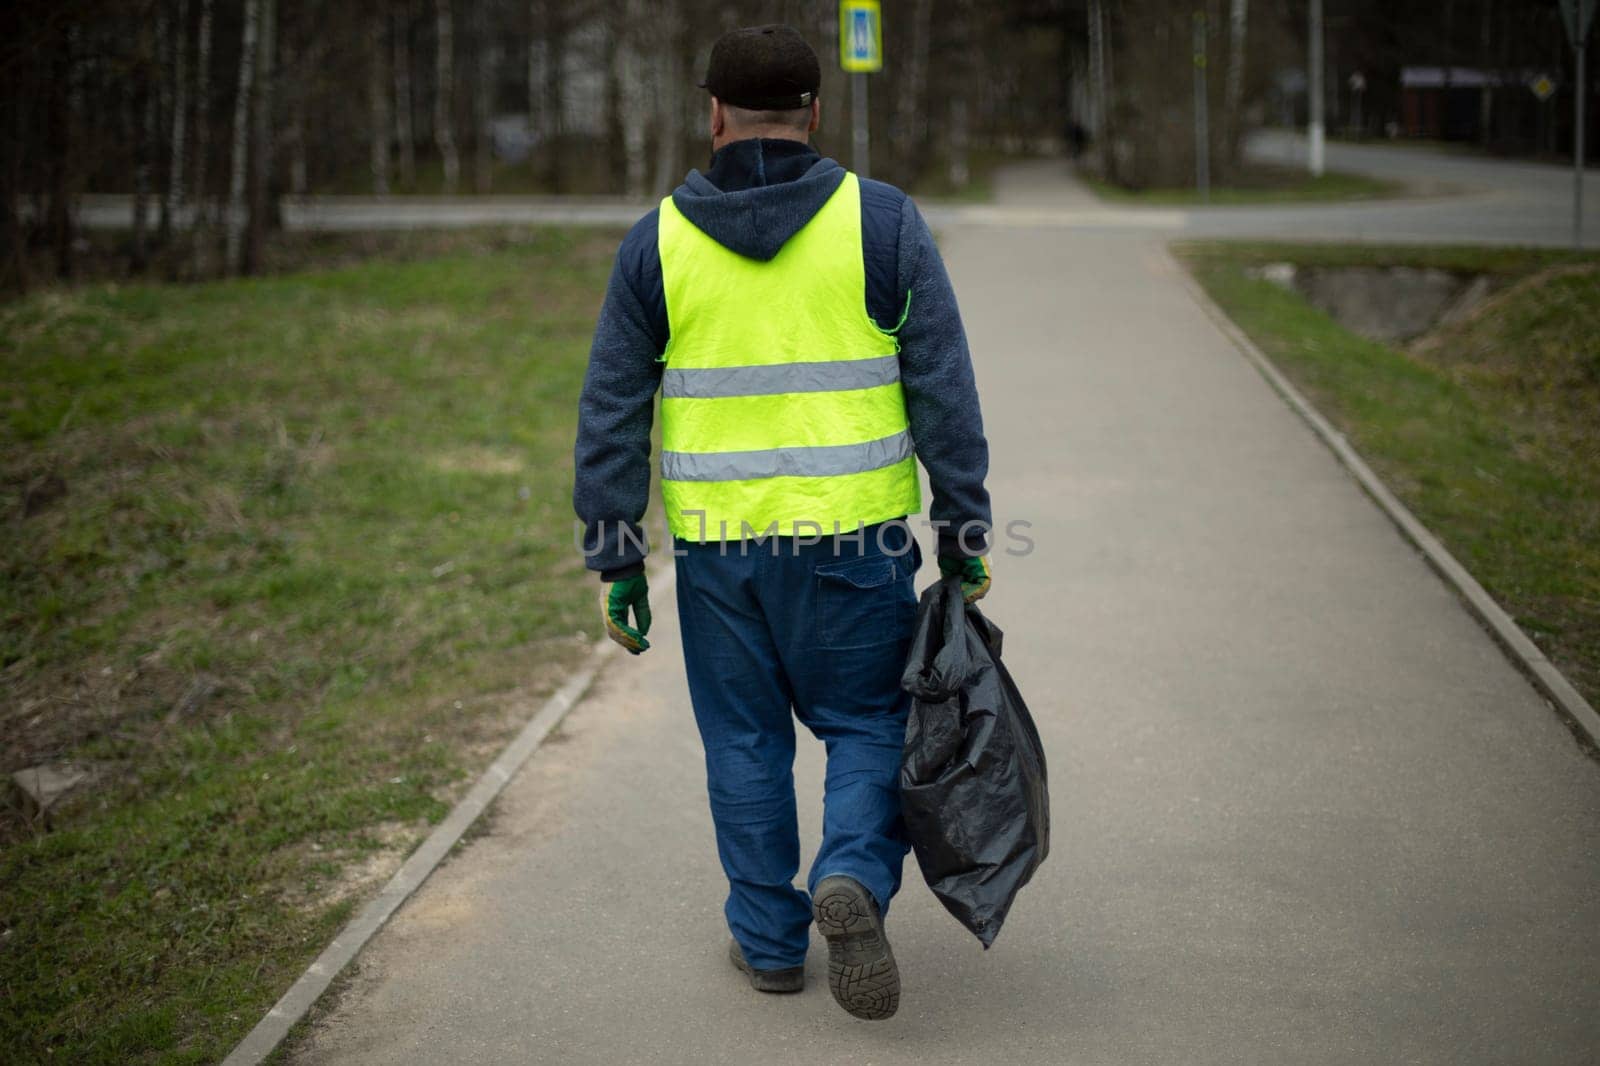 Worker collects garbage. Man carries package. Black bag in his hand. Janitor on road.